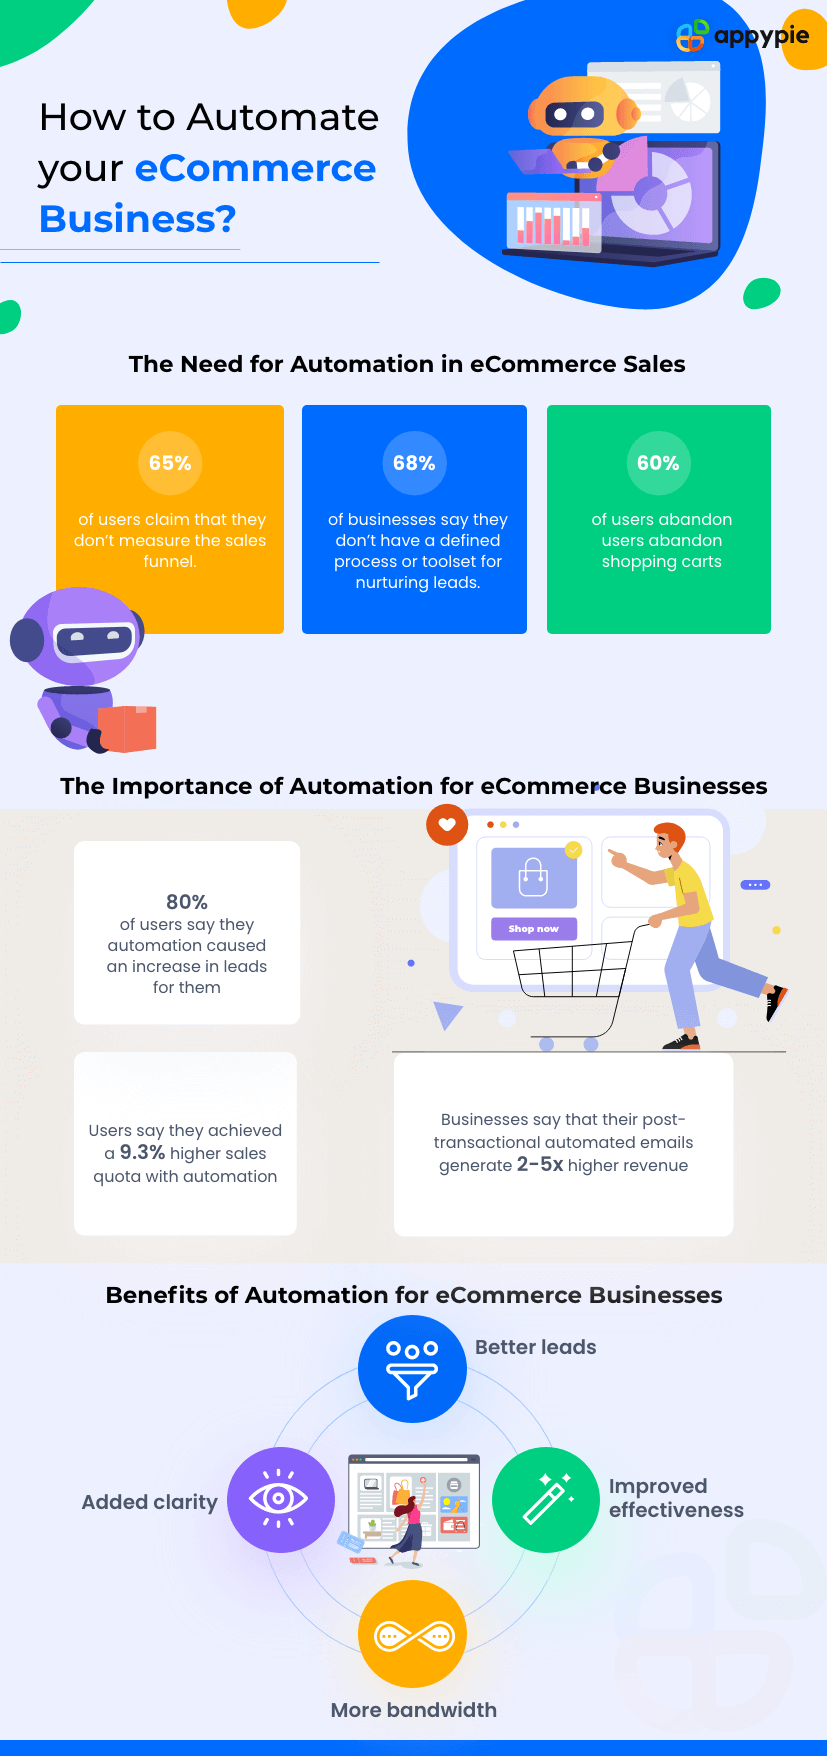 How to Automate your e-Commerce Business - Appy pie